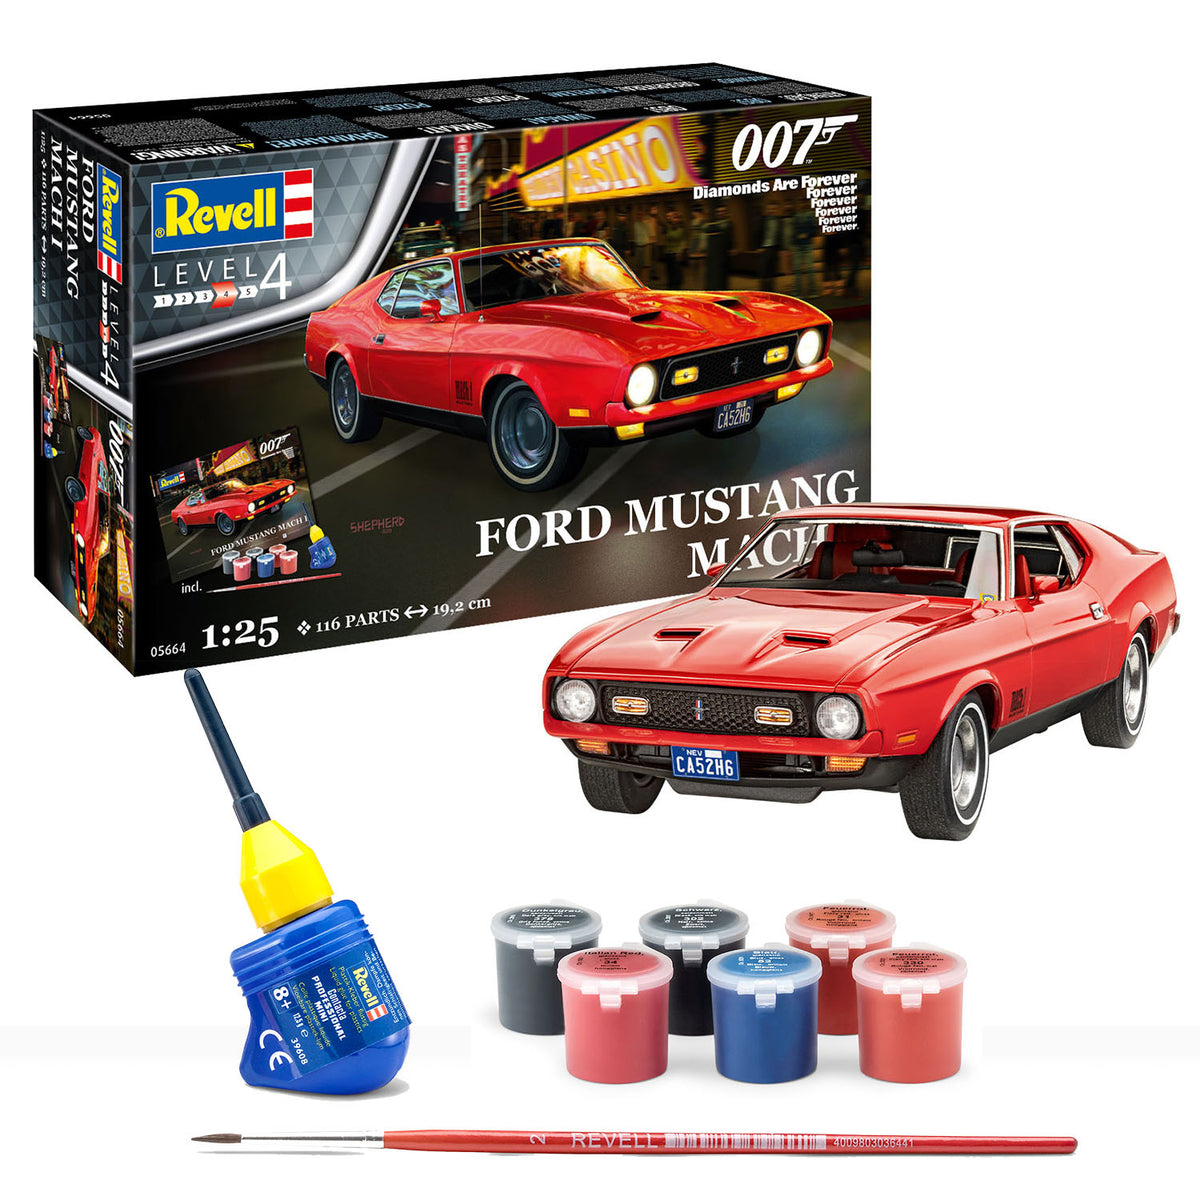 James Bond Ford Mustang Model Car Kit - Diamonds Are Forever Edition - By Revell